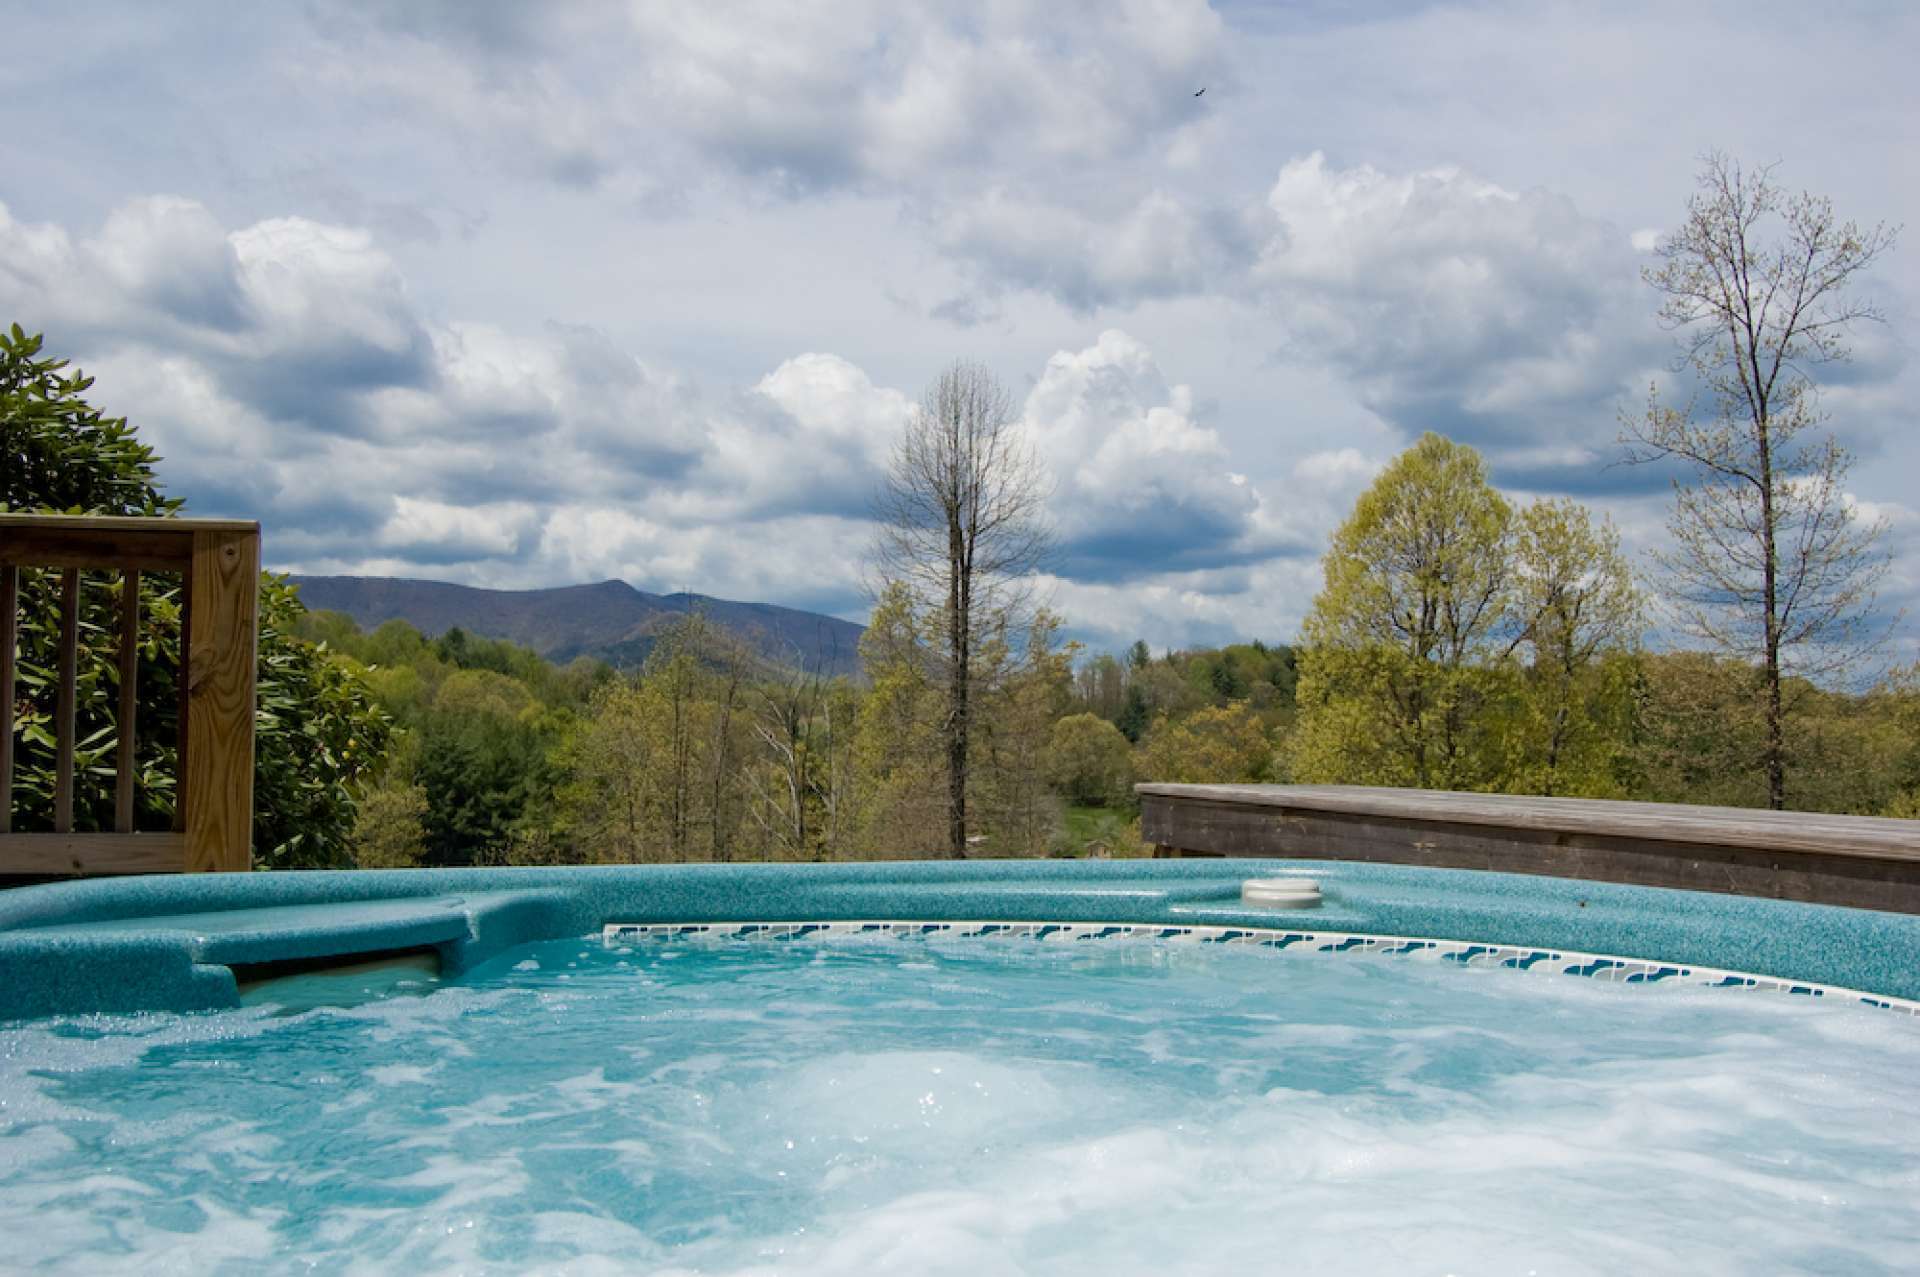 ...Simply relaxing in the hot tub while admiring the mountain views or counting the stars.